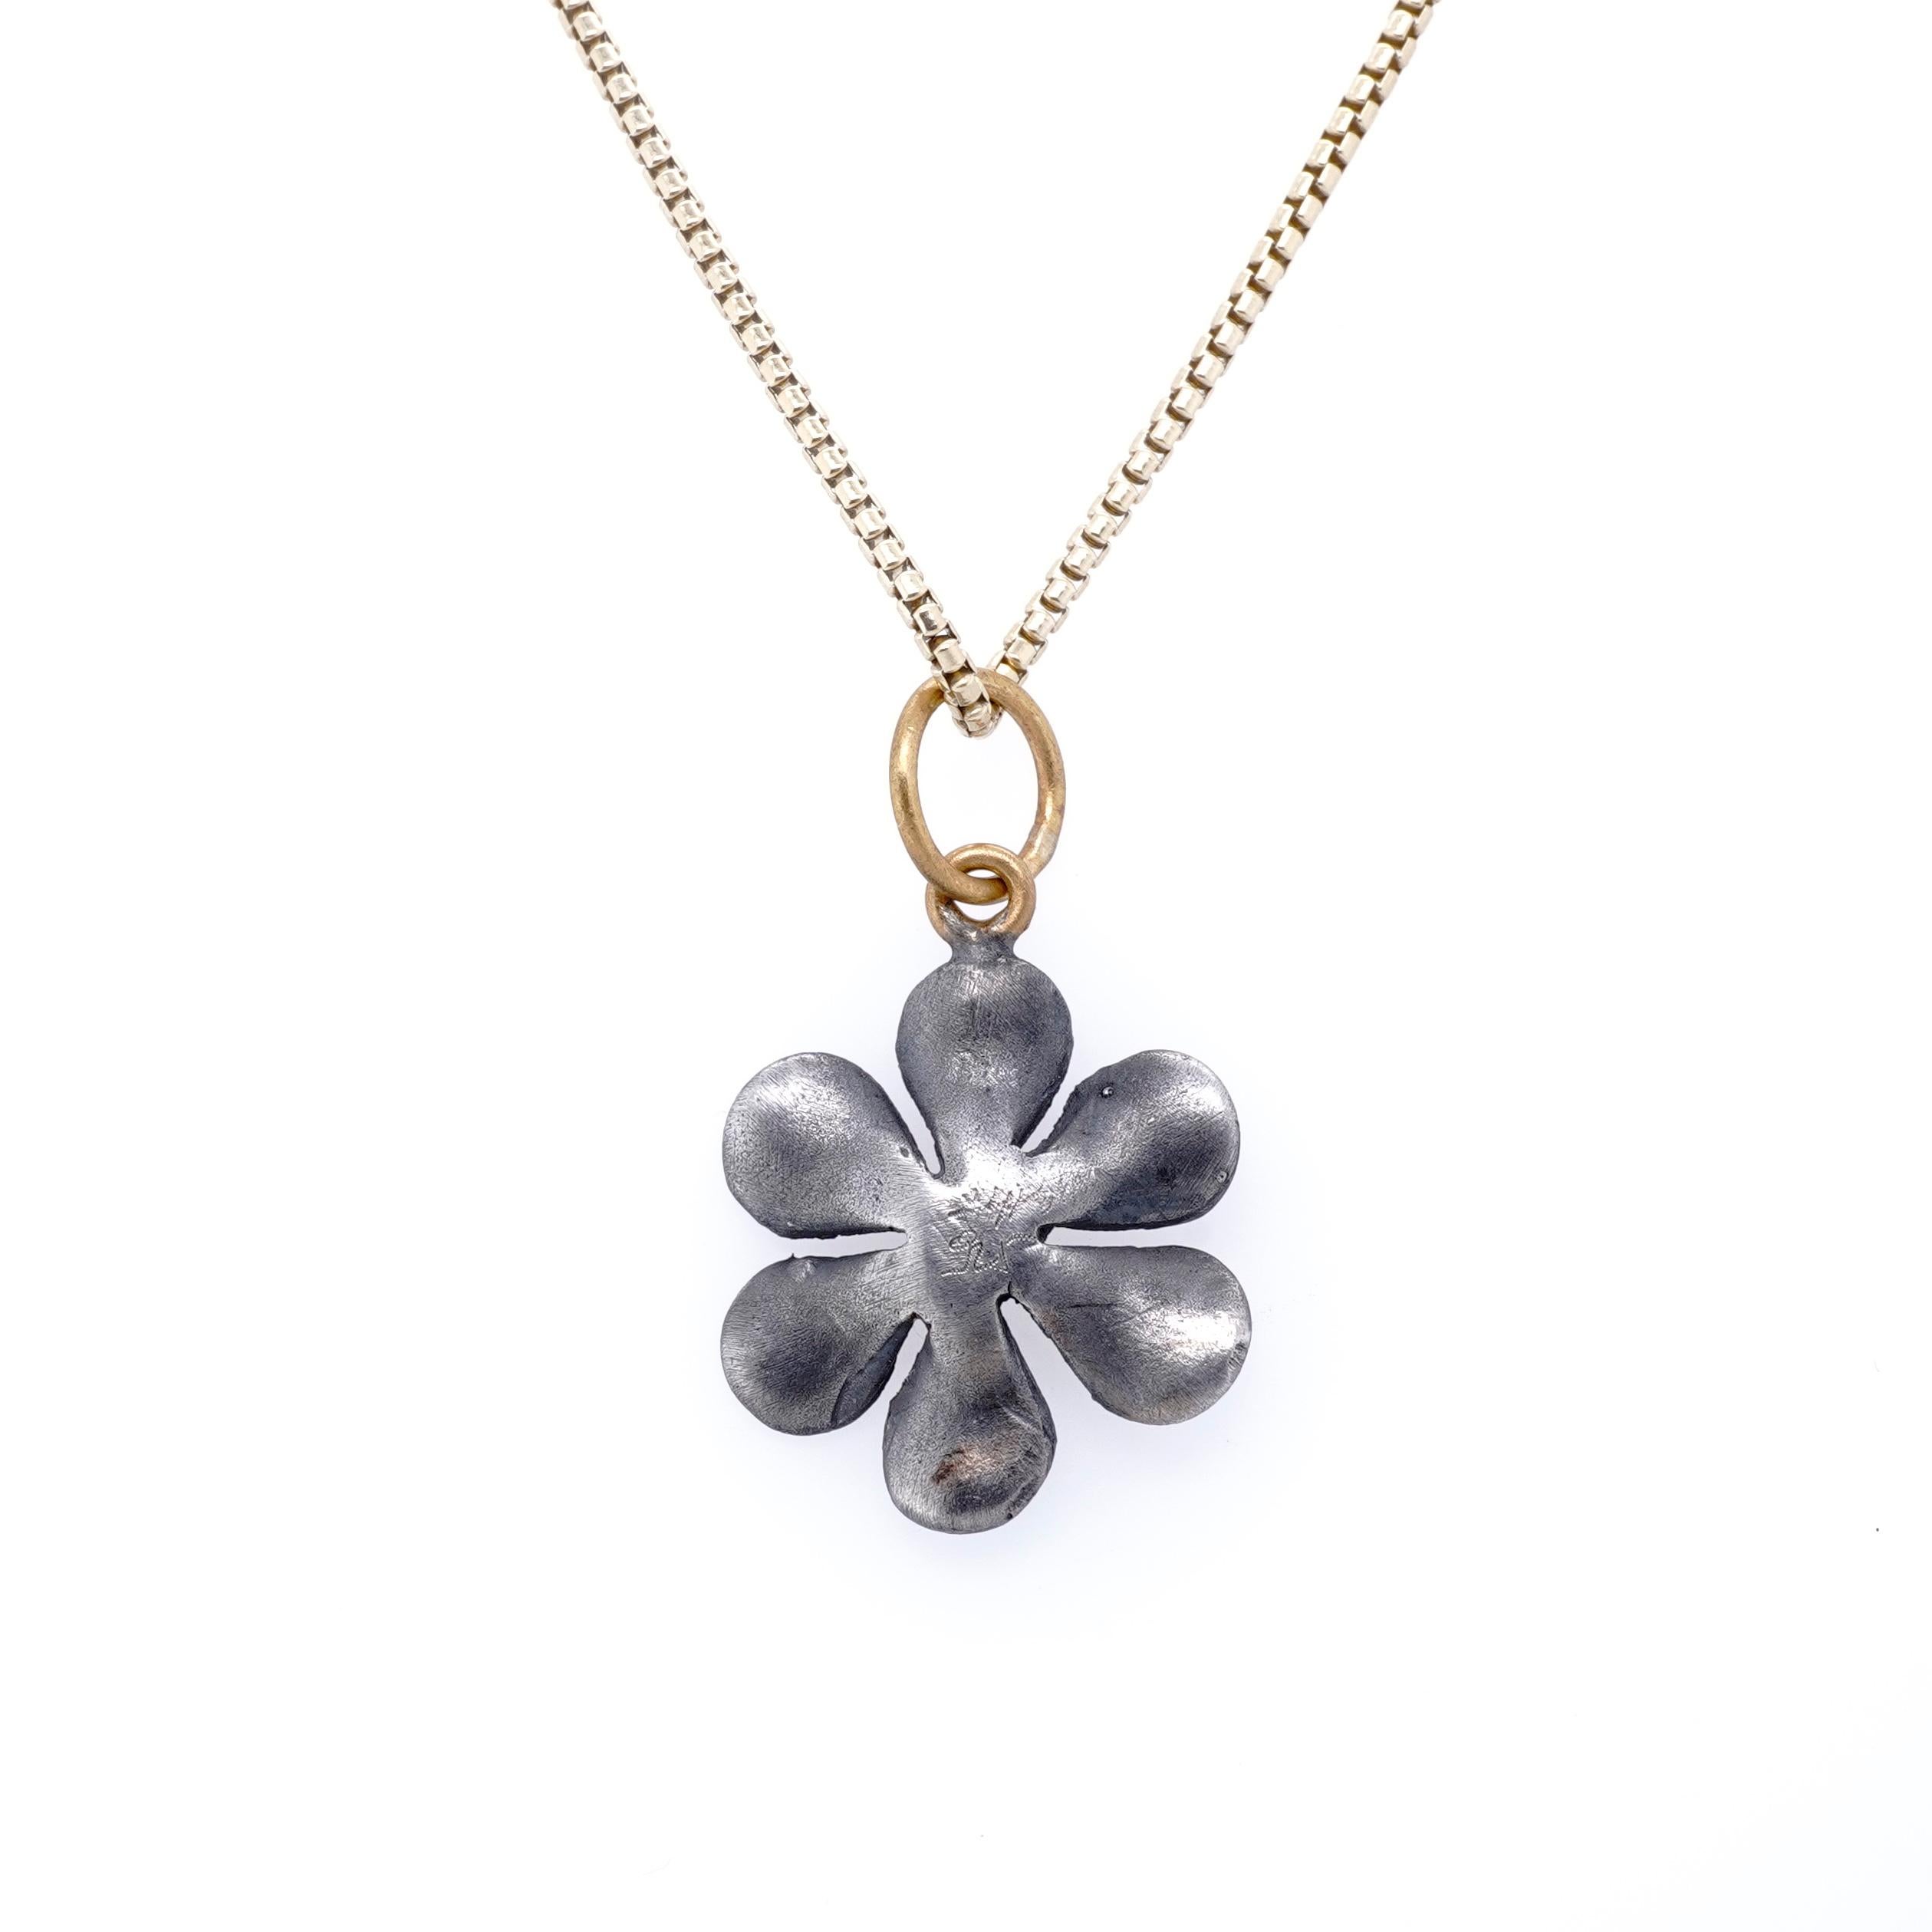 Medium, Sterling Silver Flower Charm Pendant Necklace with Diamond, 24kt Gold In New Condition For Sale In Bozeman, MT